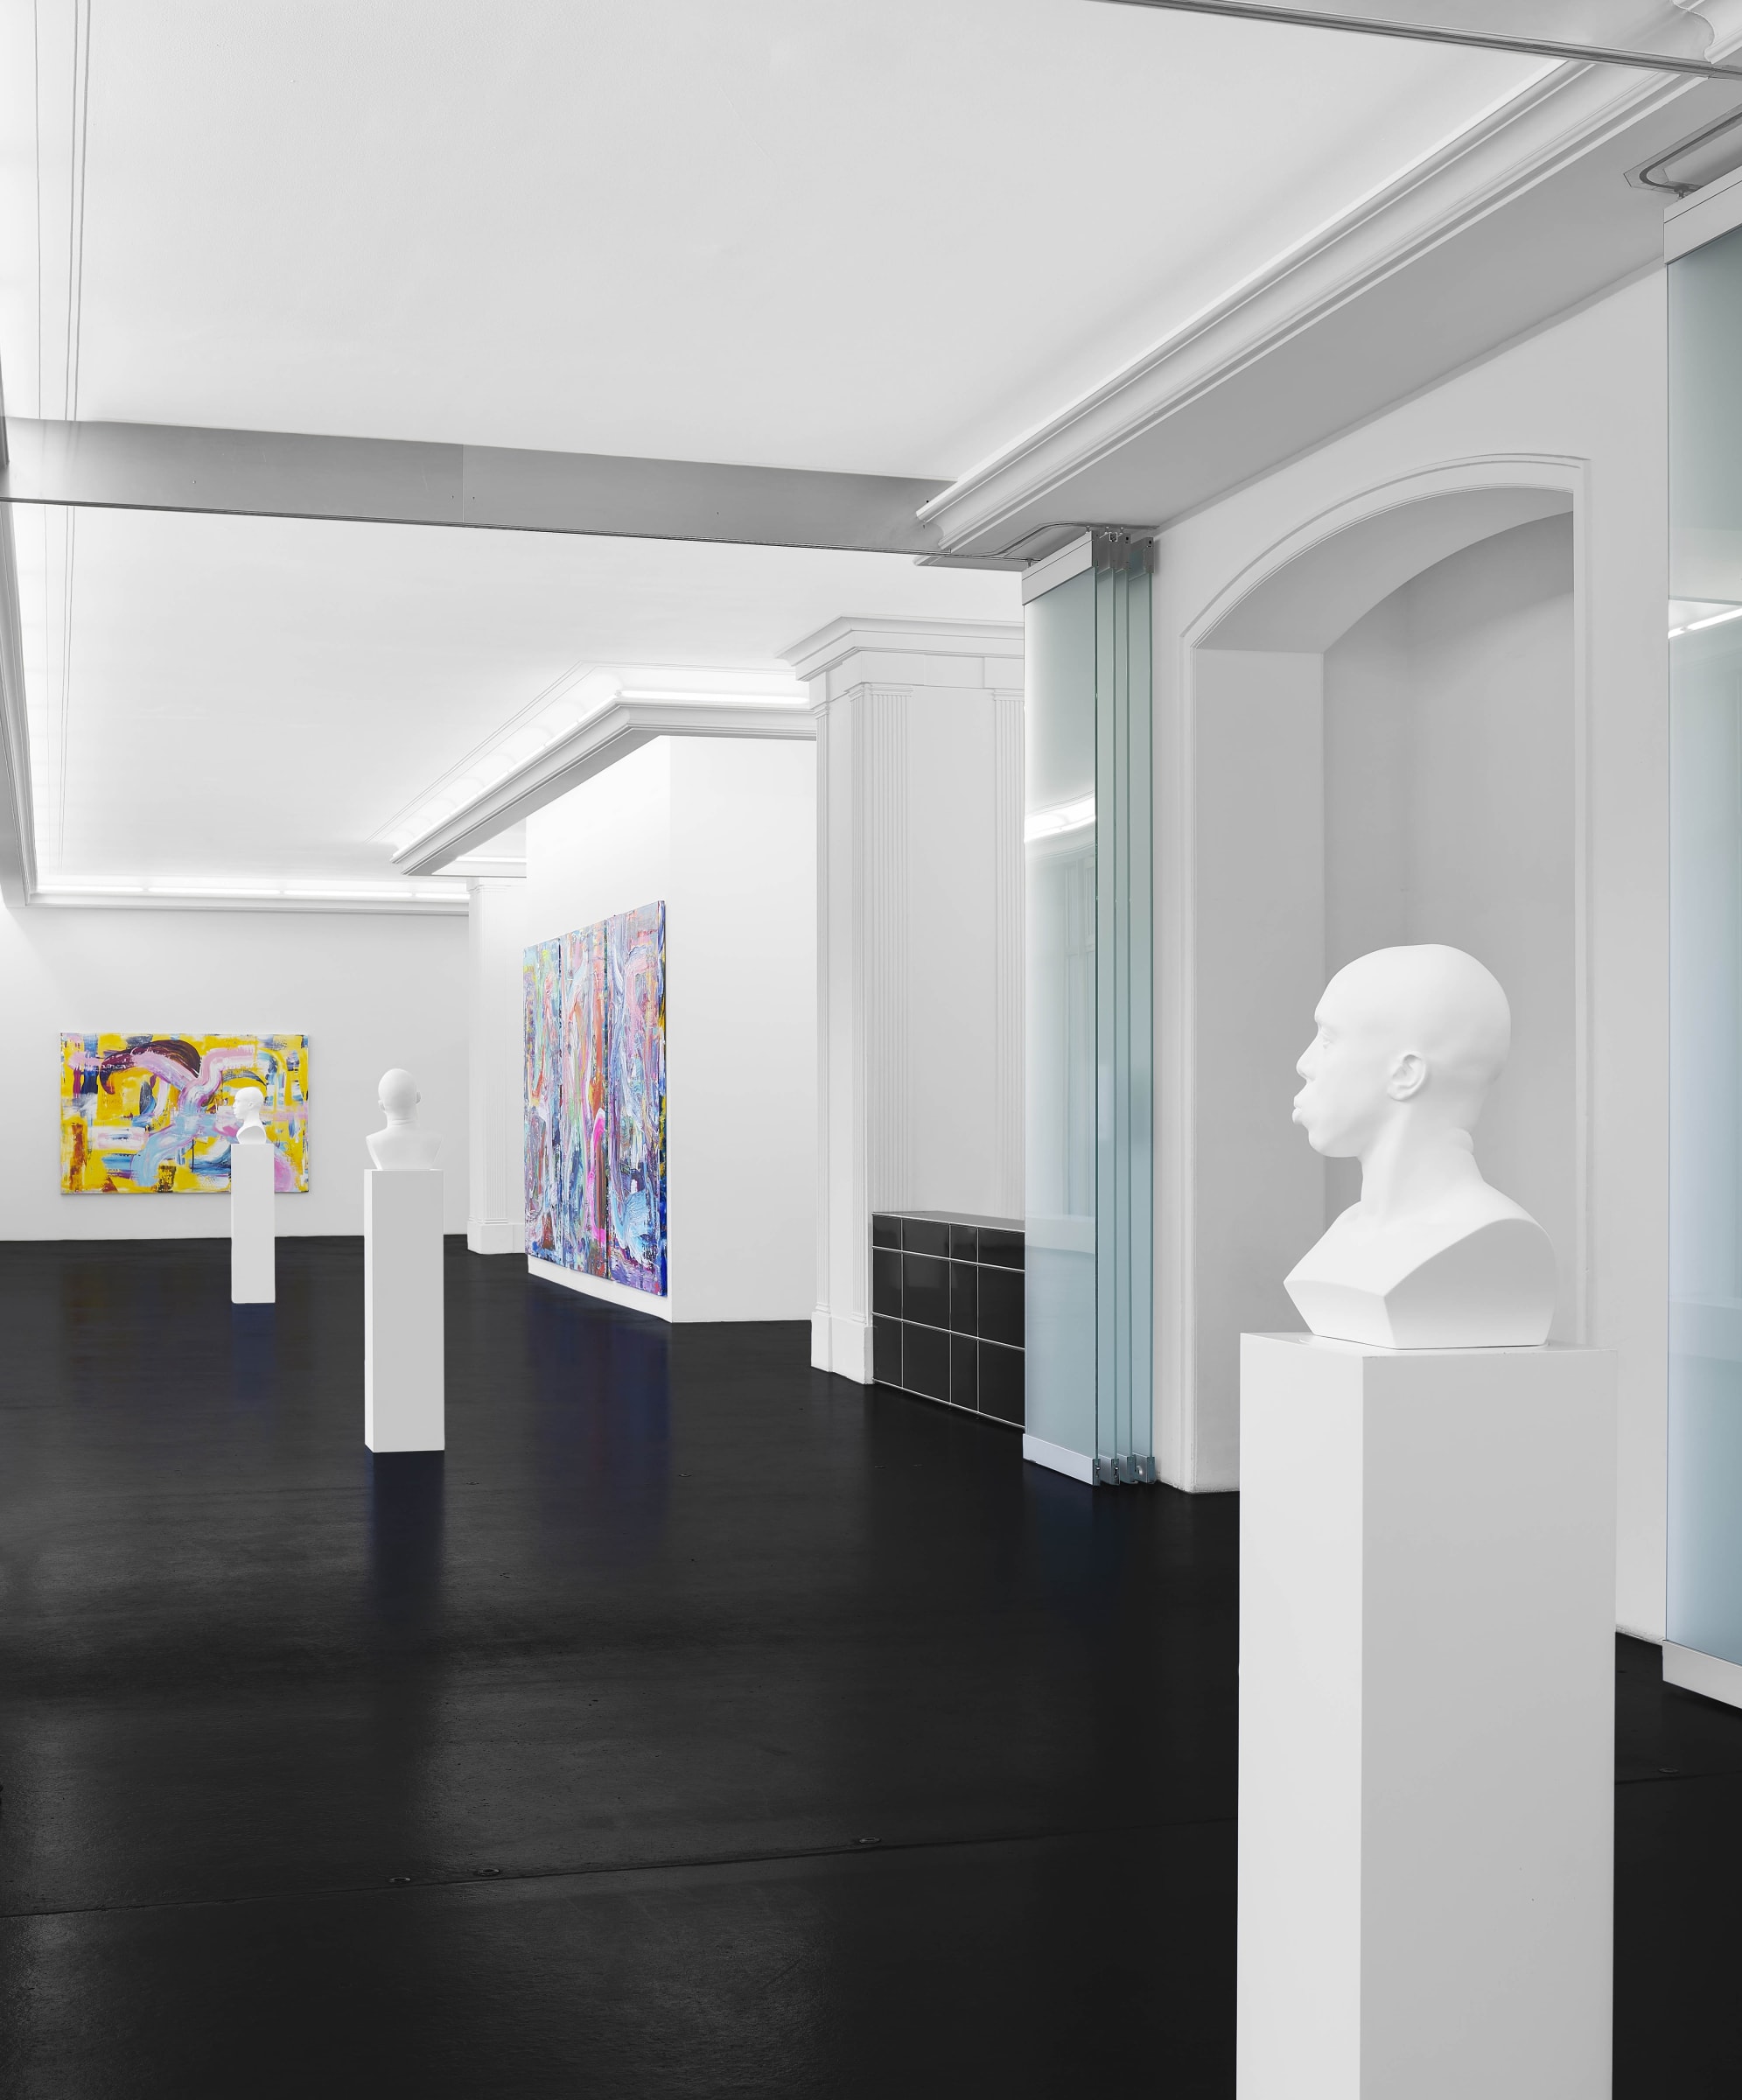 Richard KENNEDY STREET PROPHECY Installation View May 7 – June 12, 2020 Peres Projects, Berlin Photographed by: Matthias Kolb